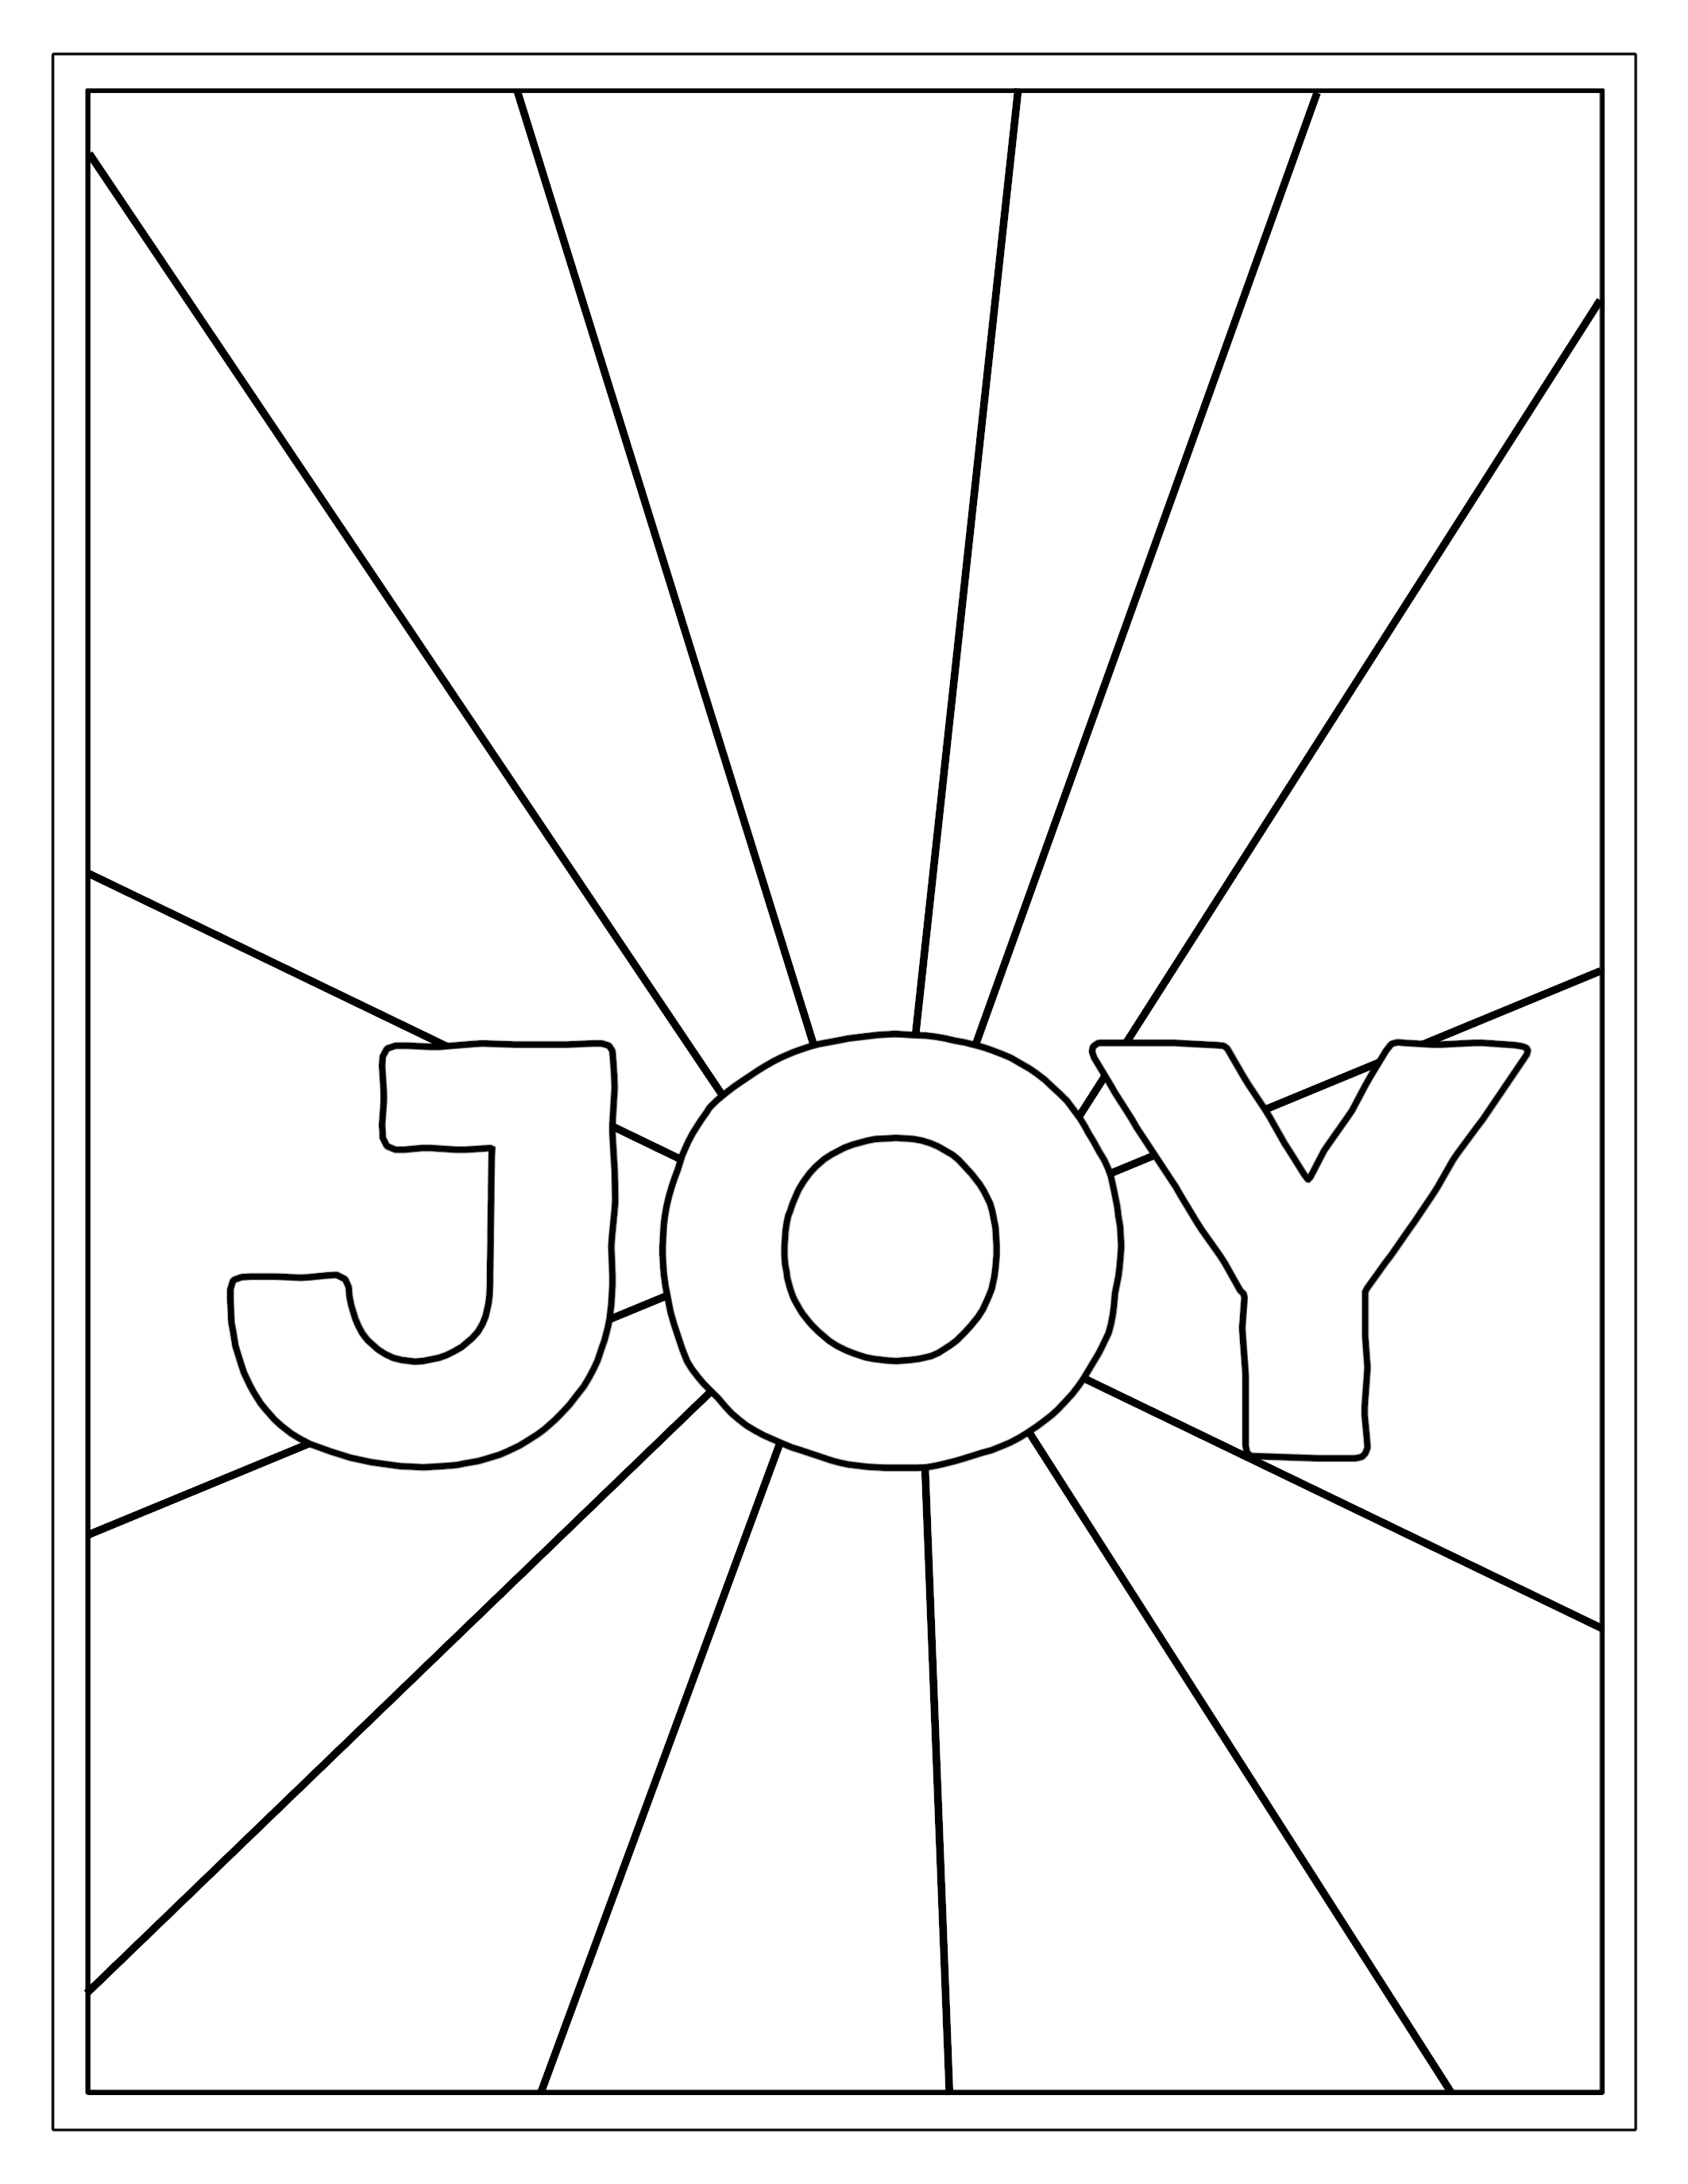 Free Printable Christmas Coloring Pages - Paper Trail Design